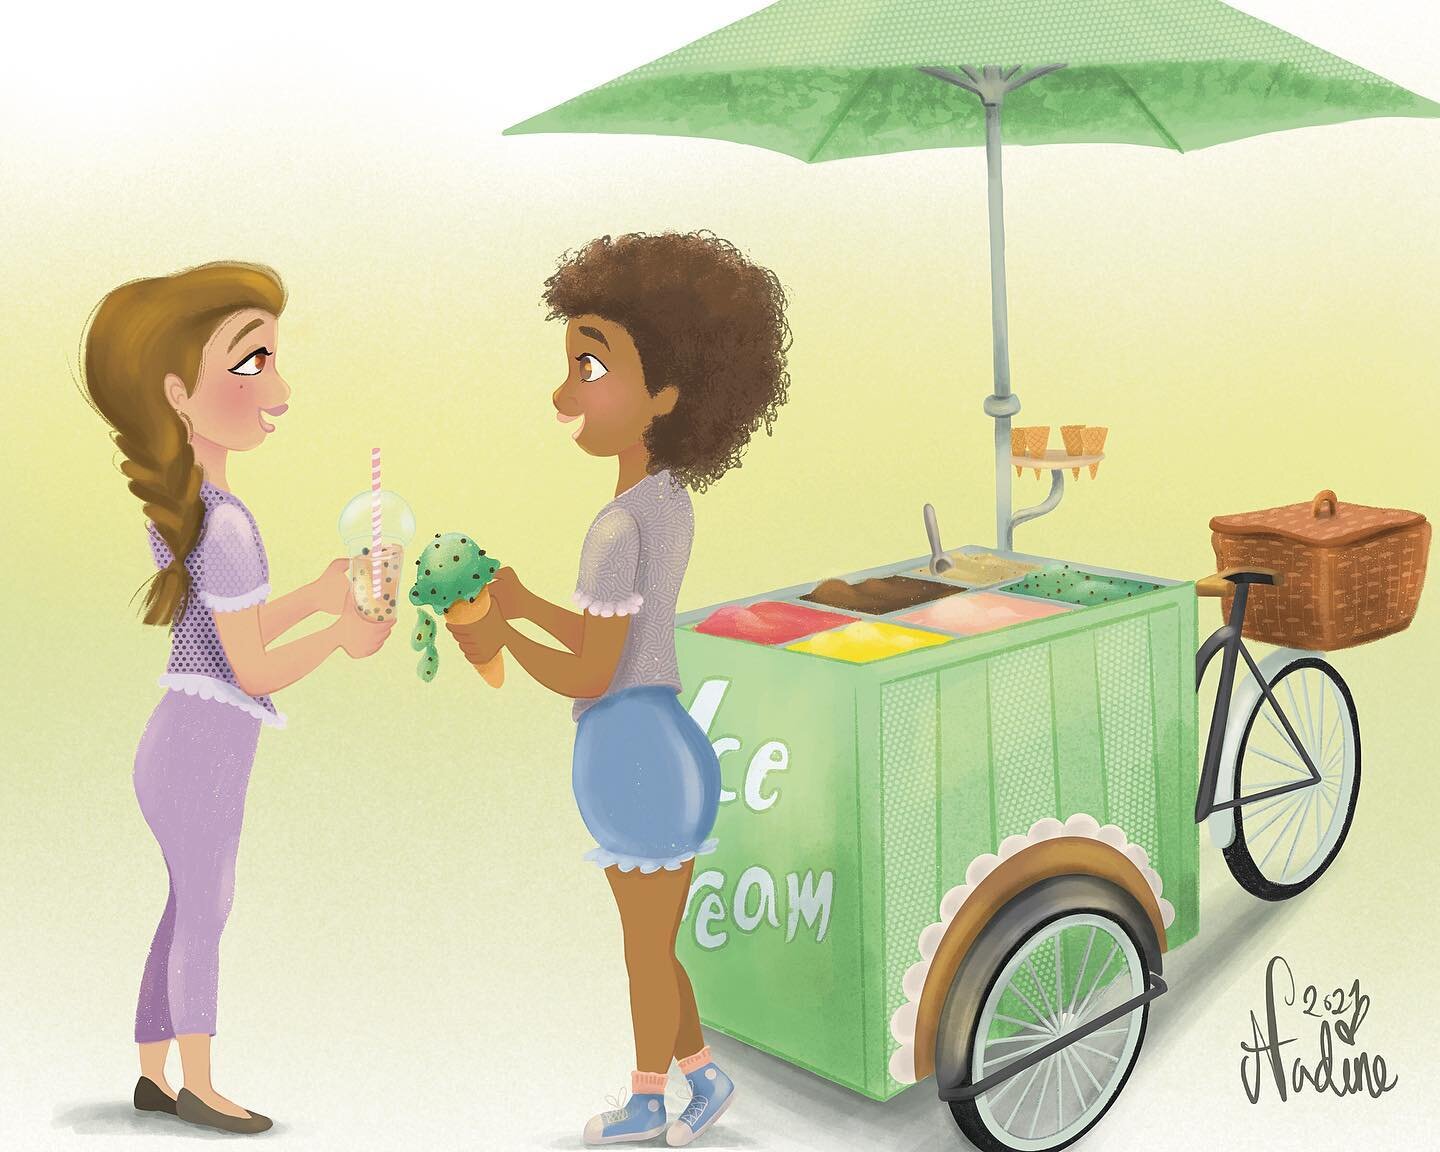 Bubble tea and mint choc ice cream trade.
A illustration for #childhoodweek for prompt #trade